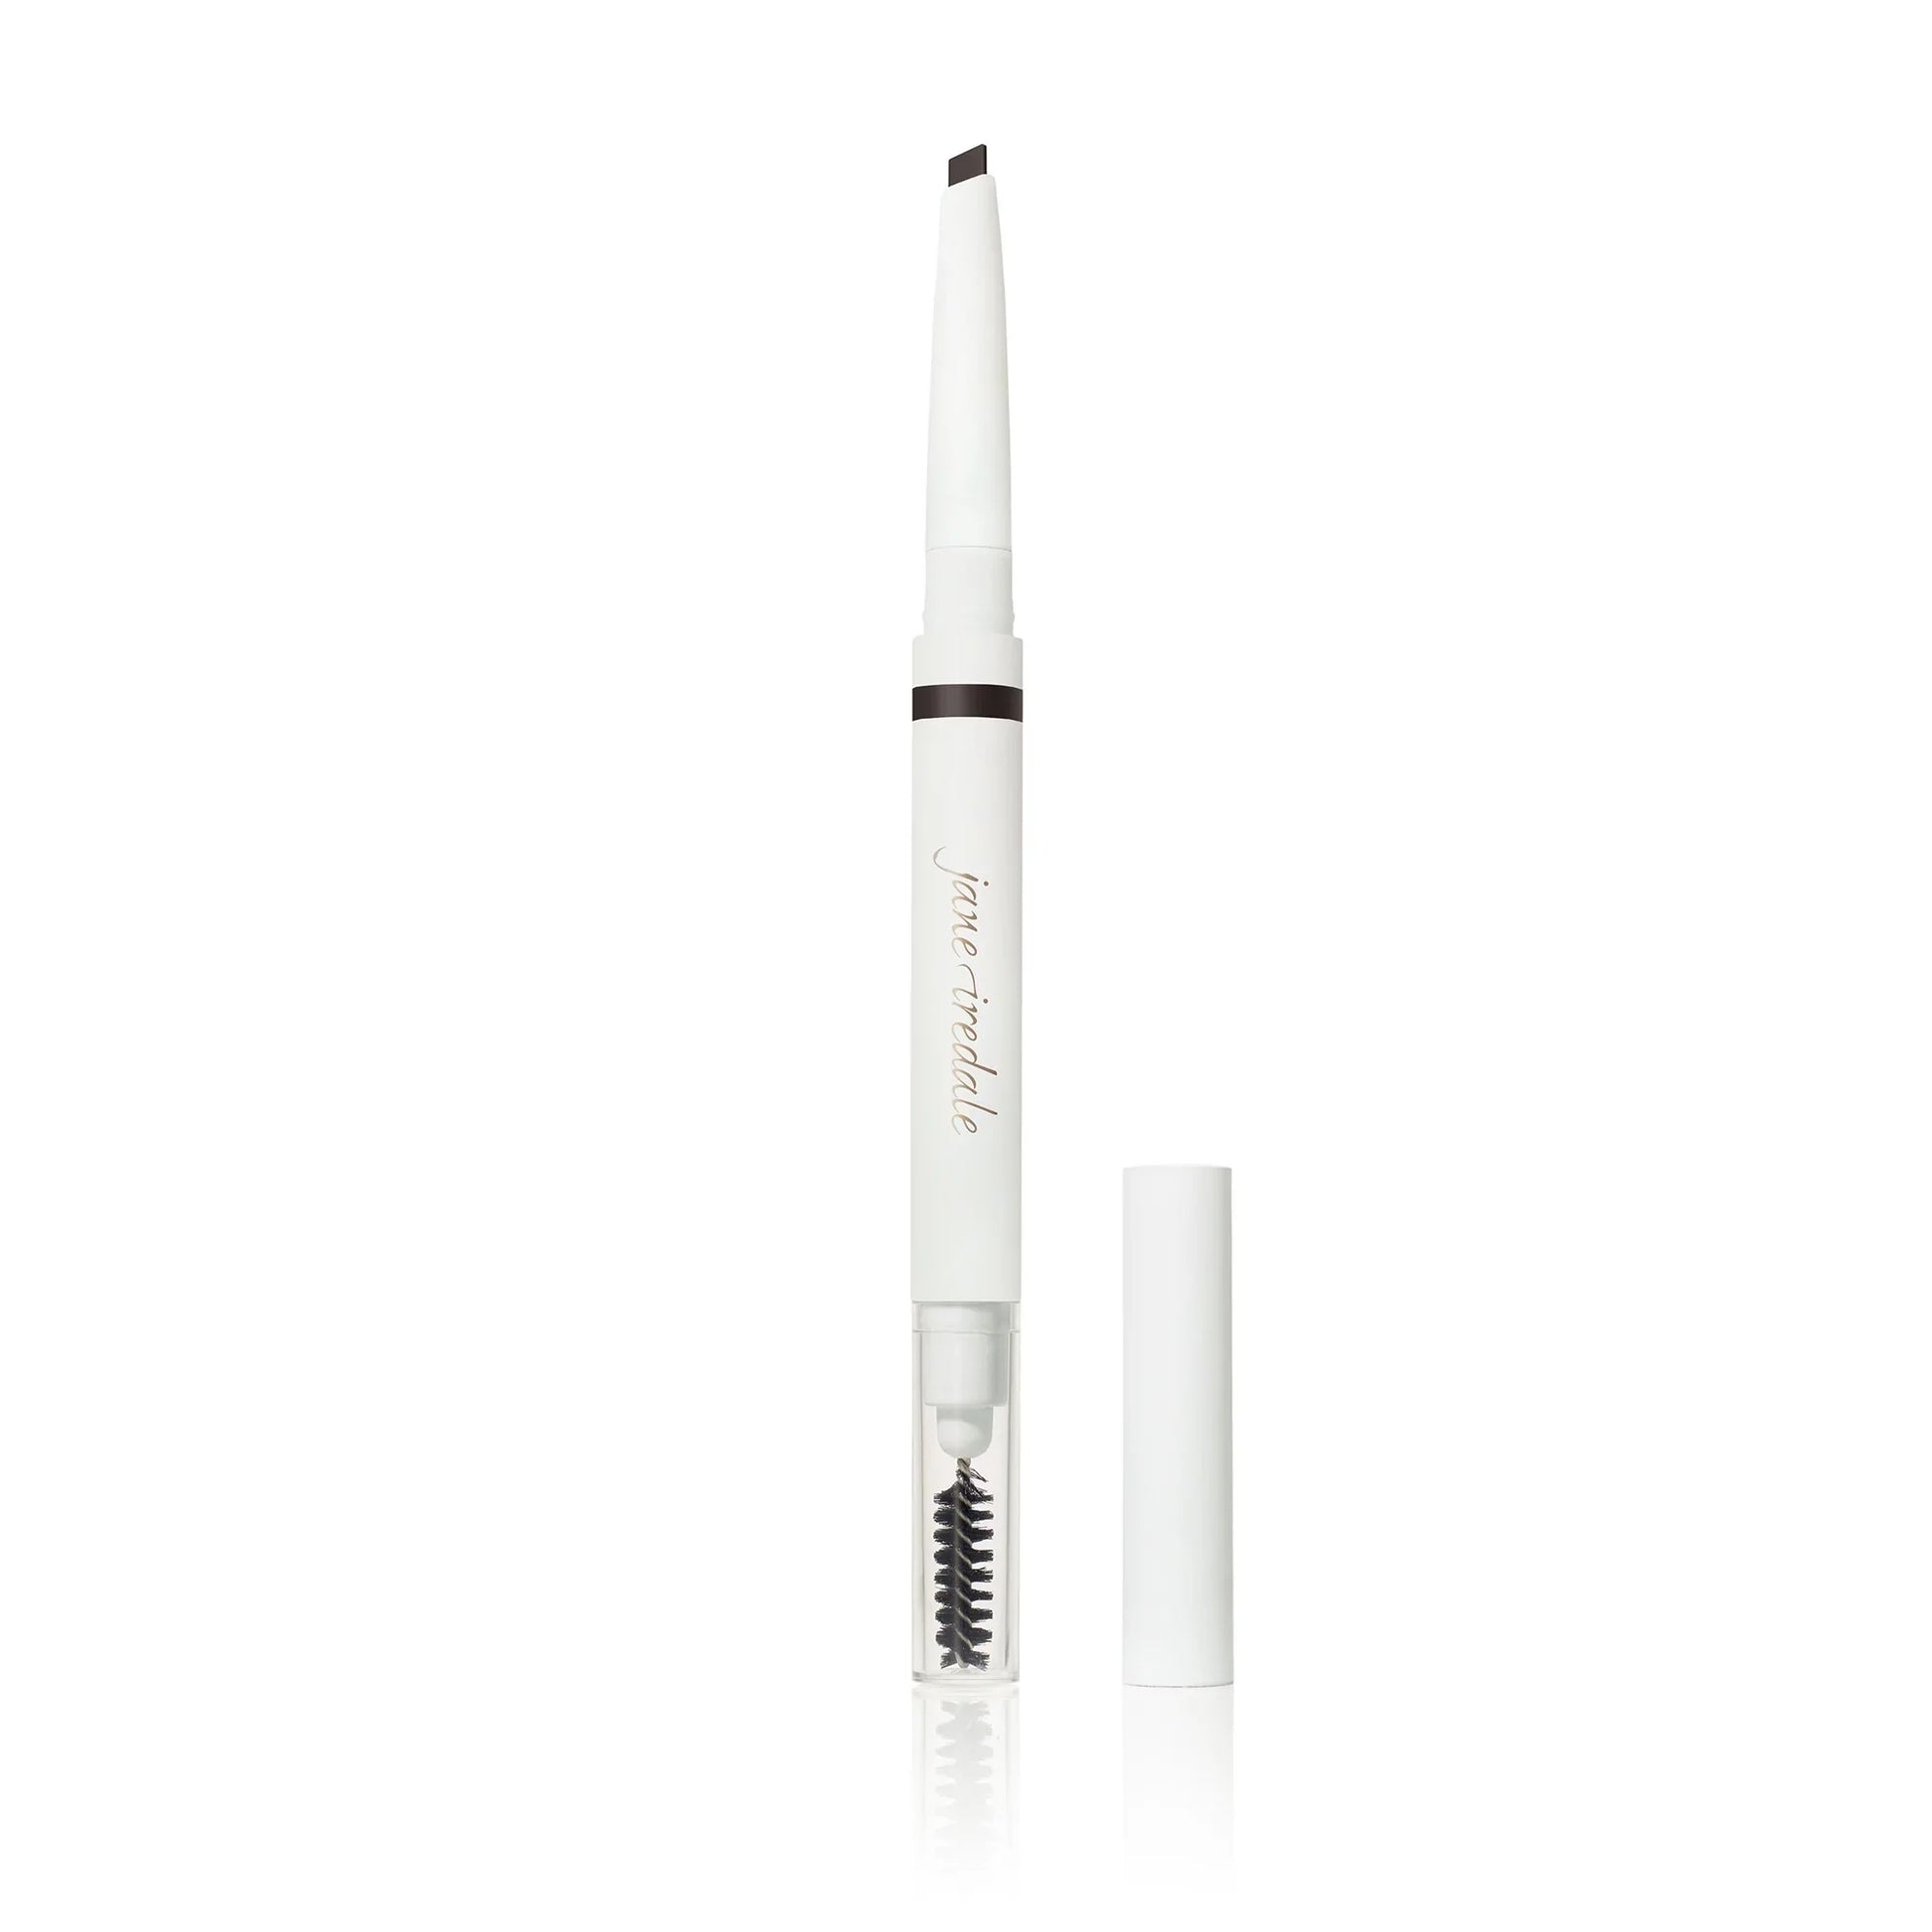 Jane Iredale Shaping Pencil Soft Blonde Shaping Pencil